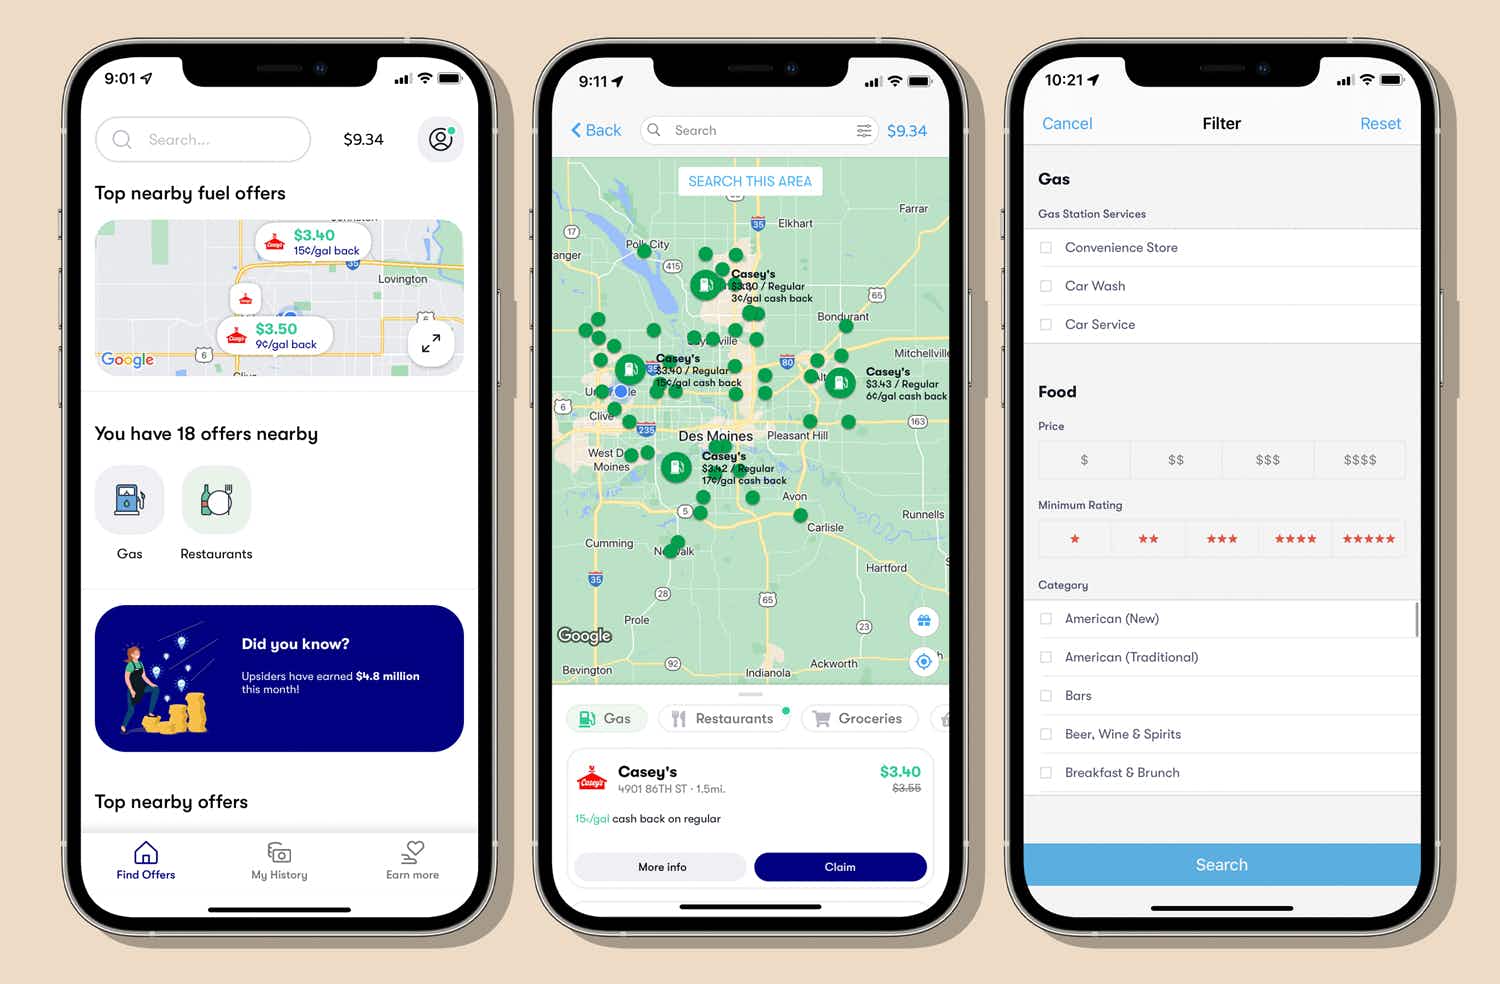 upside cash-back app screenshots for nearby offers, map, and filters view